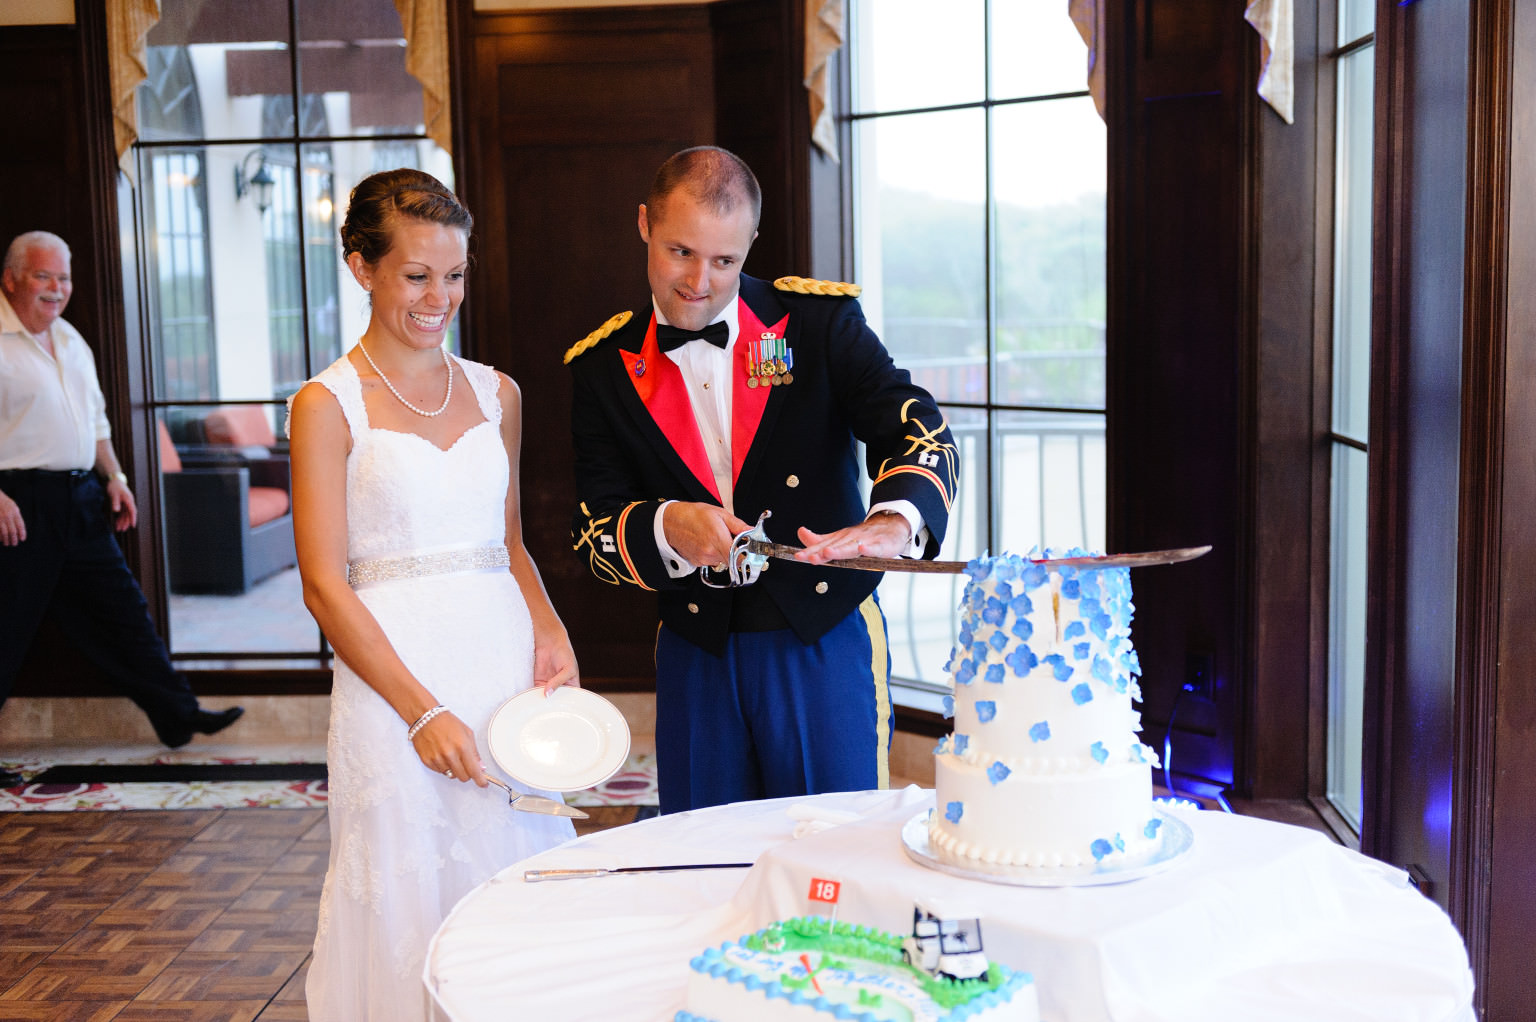 Cutting wedding cake with military saber